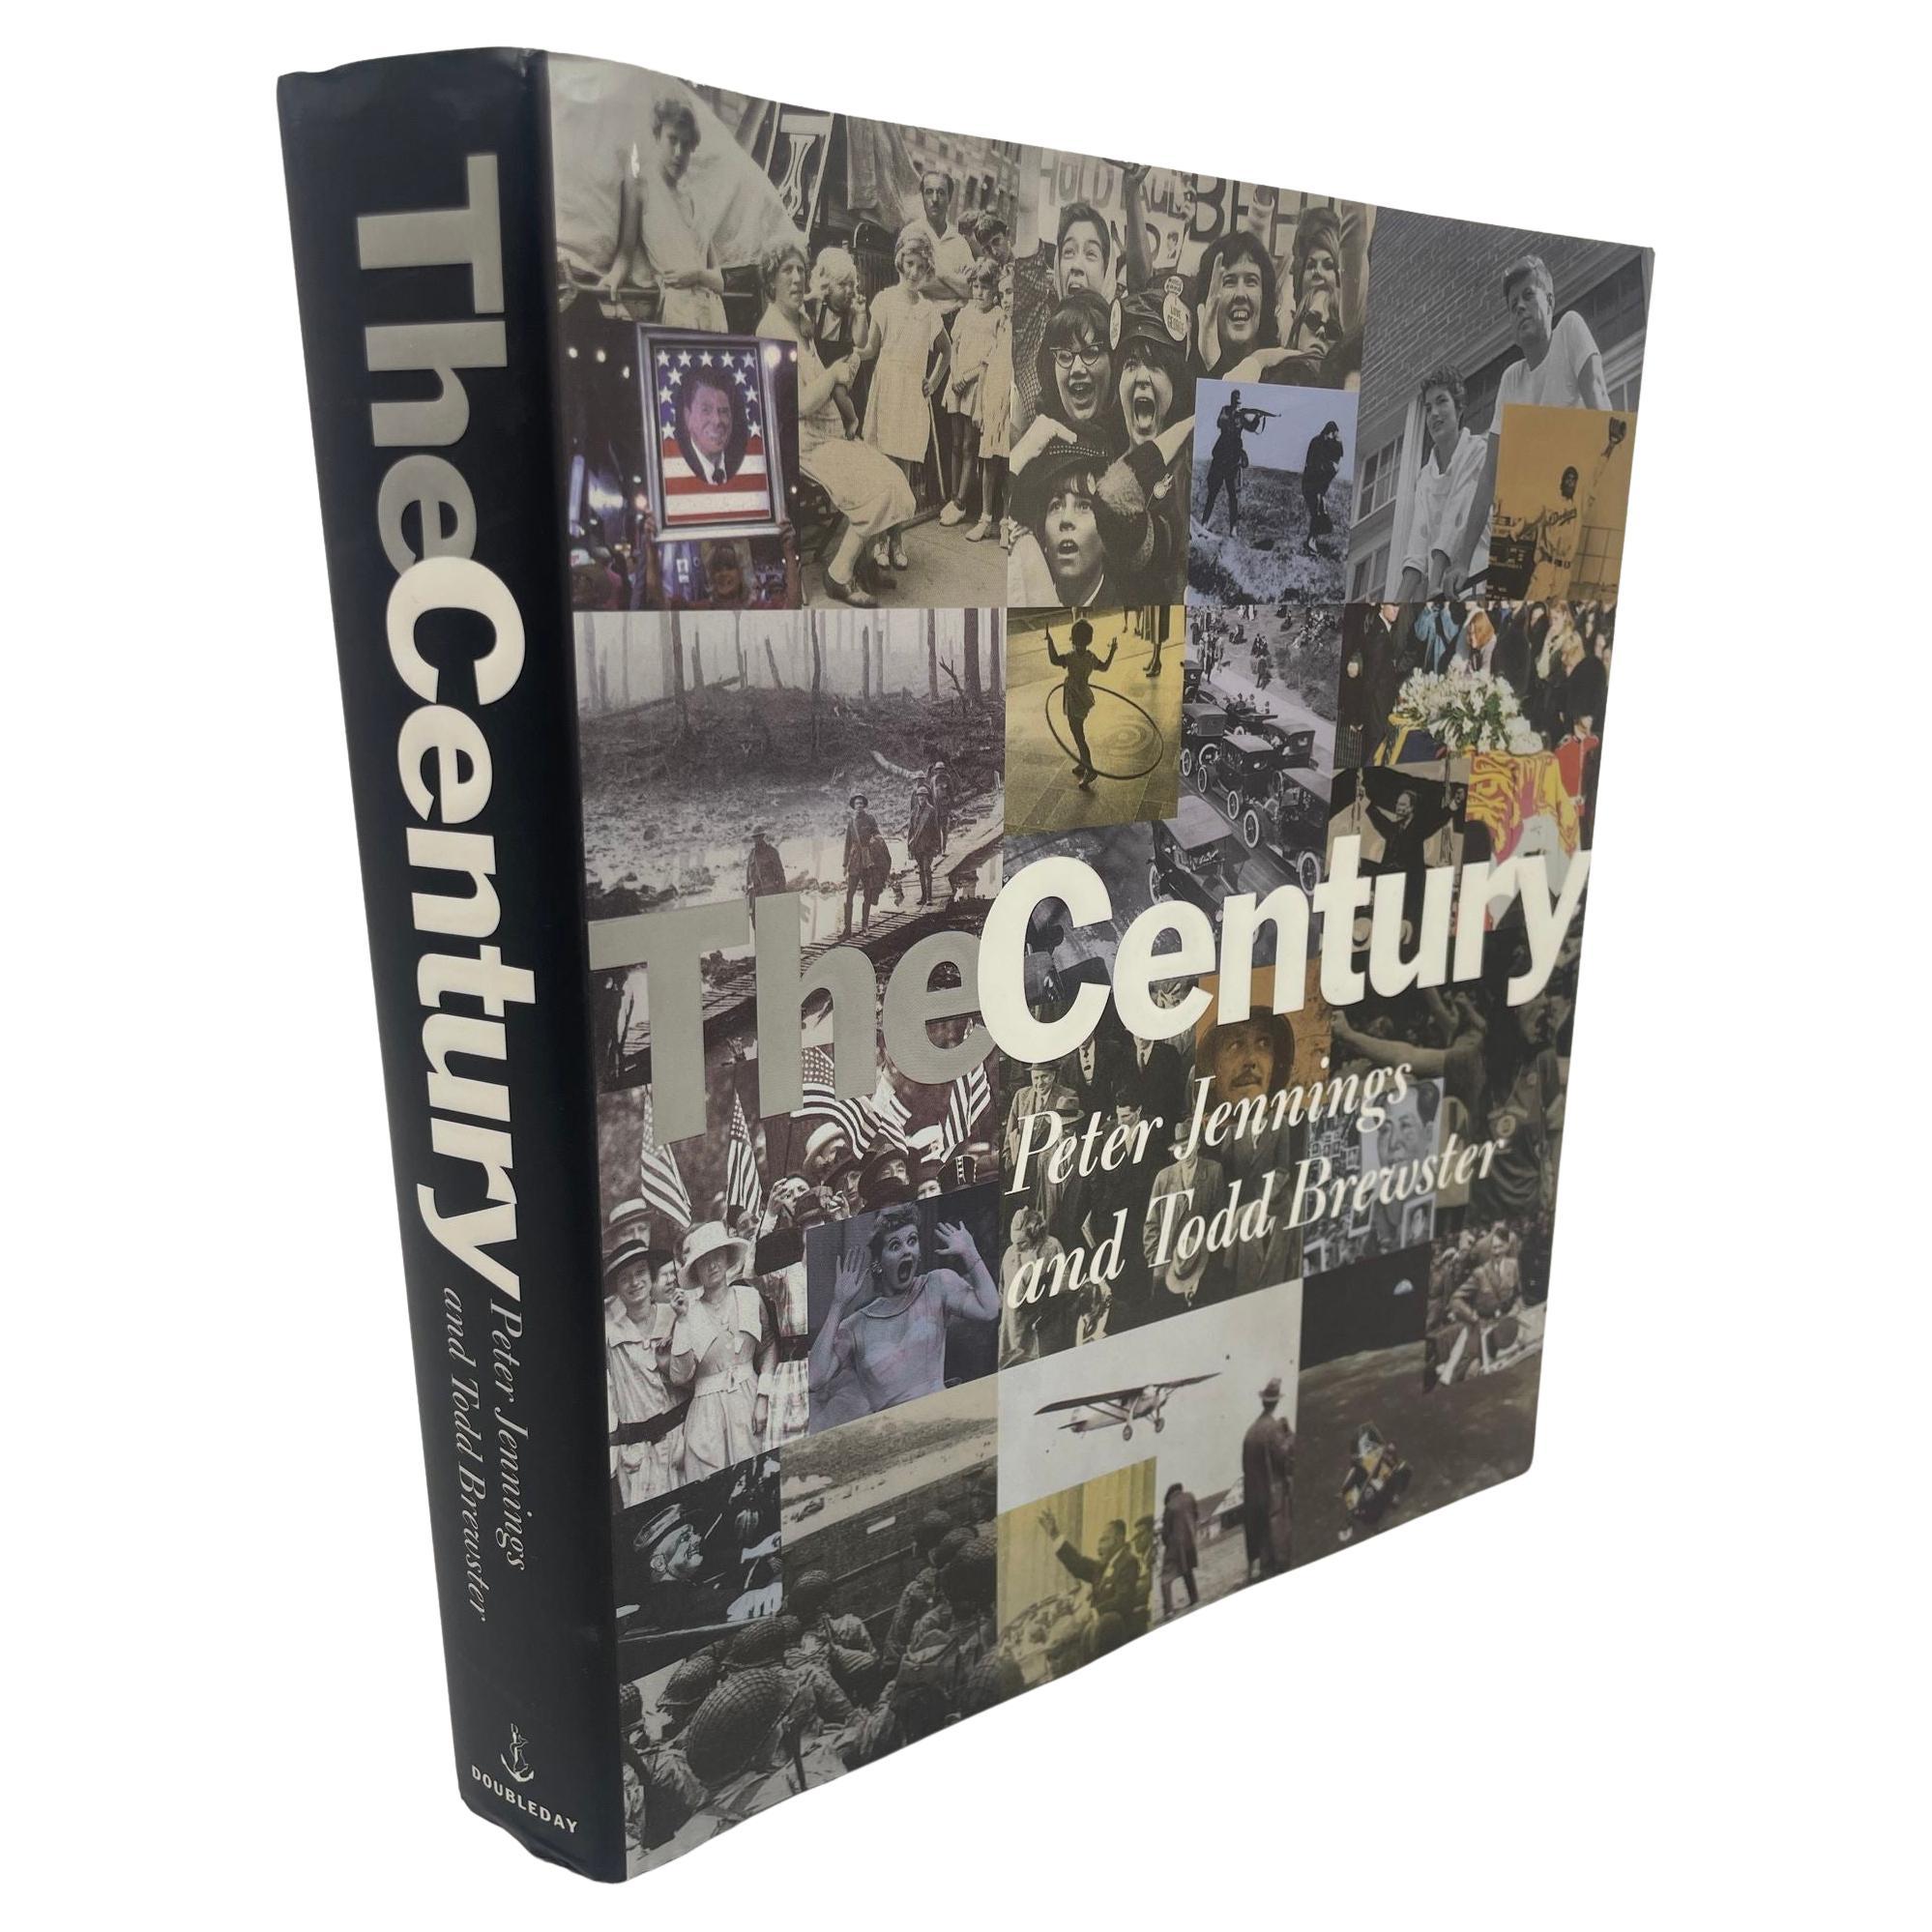 The Century by Peter Jennings and Todd Brewster Published by Doubleday 1998